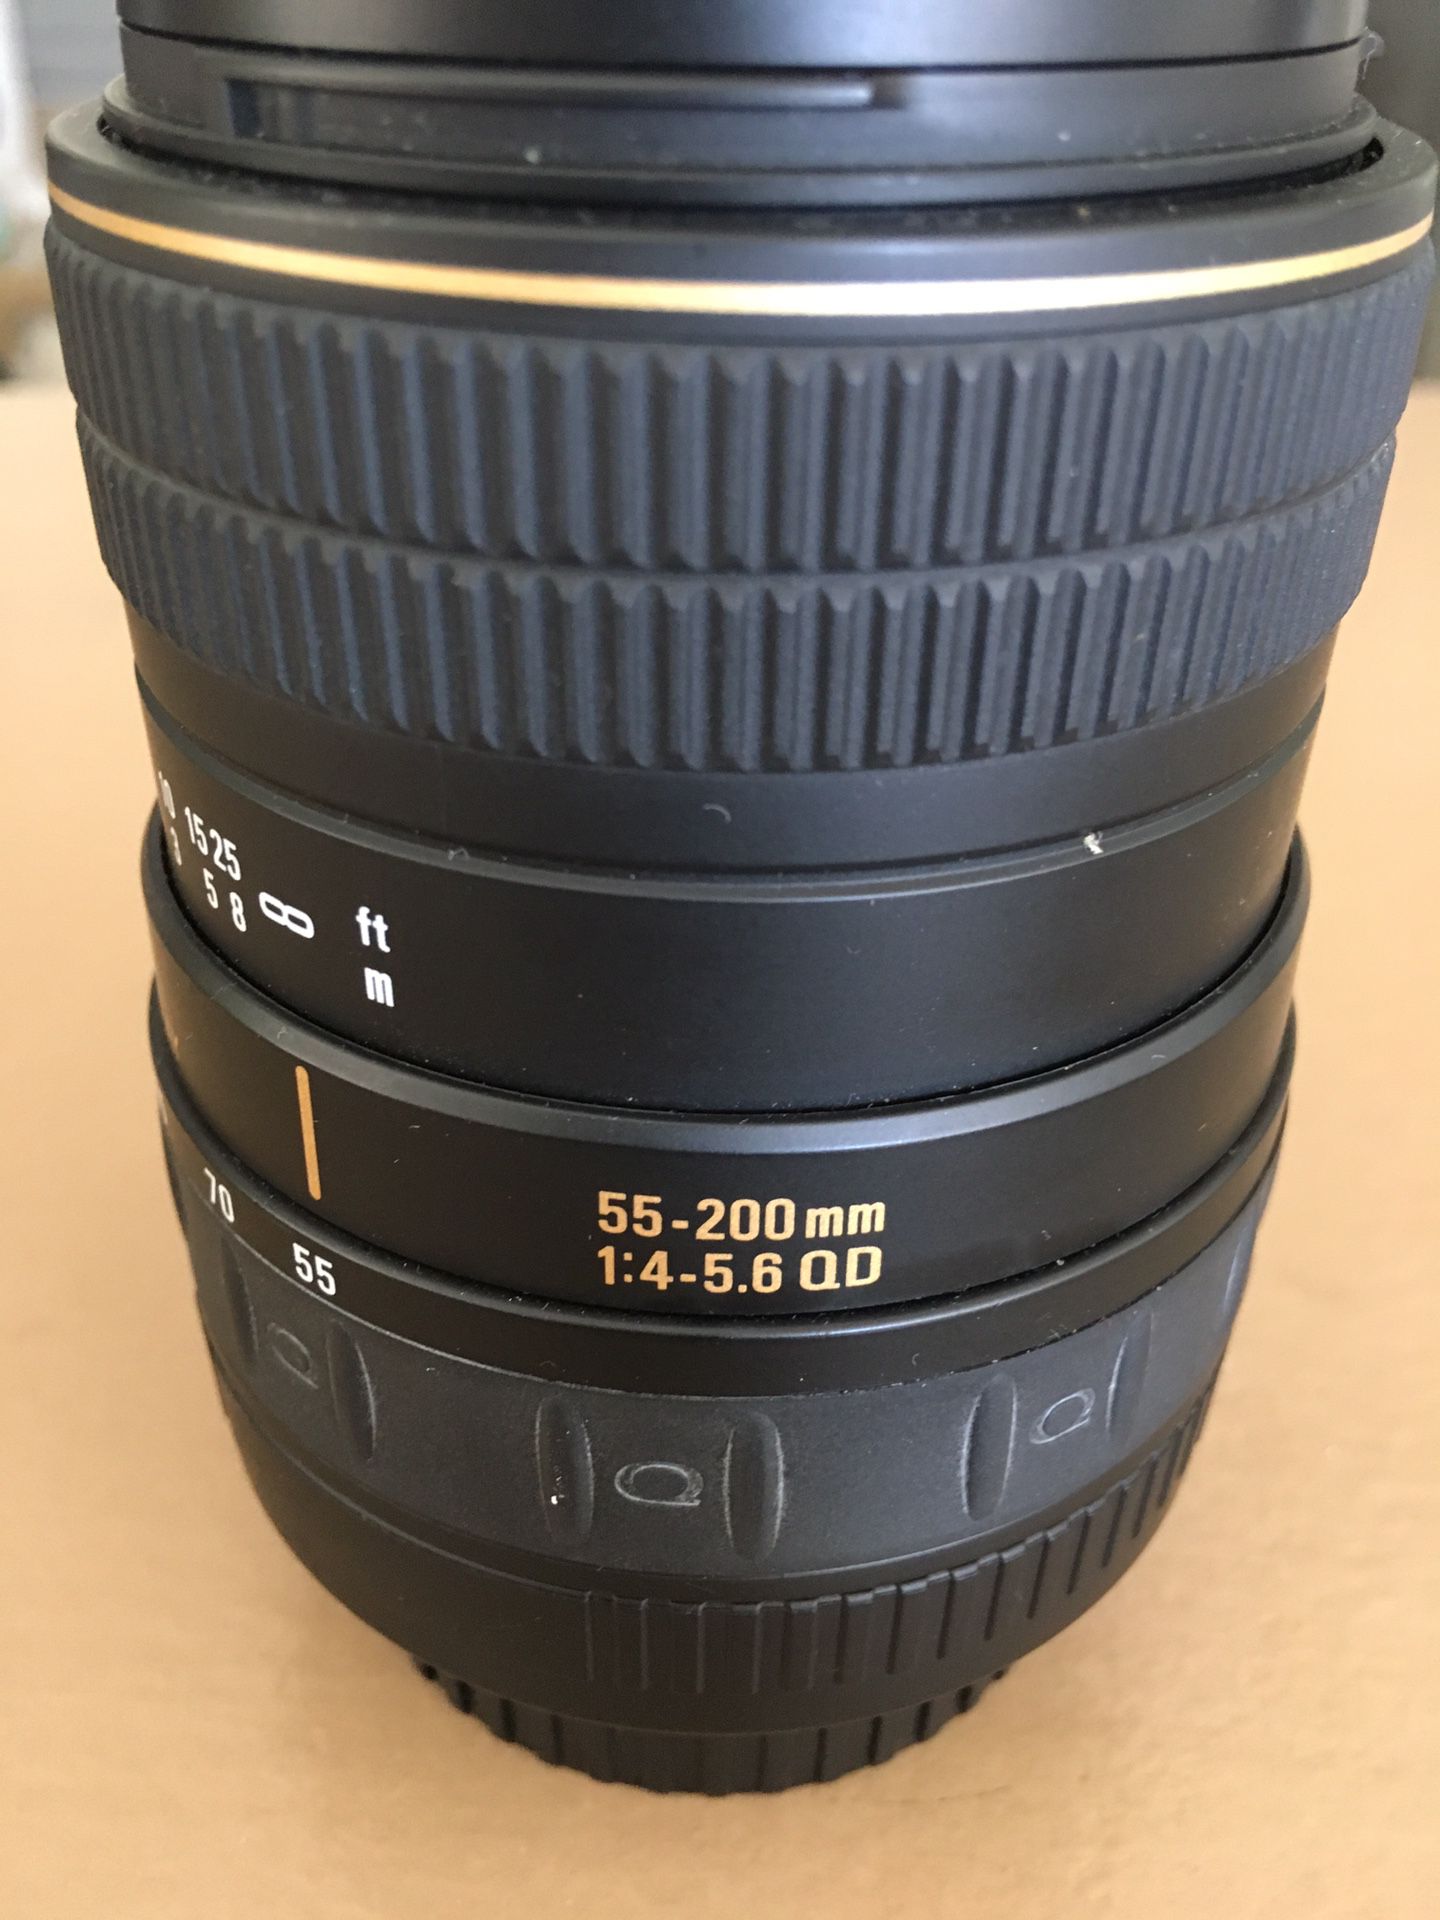 CANON LENS 55-200 mm Gold